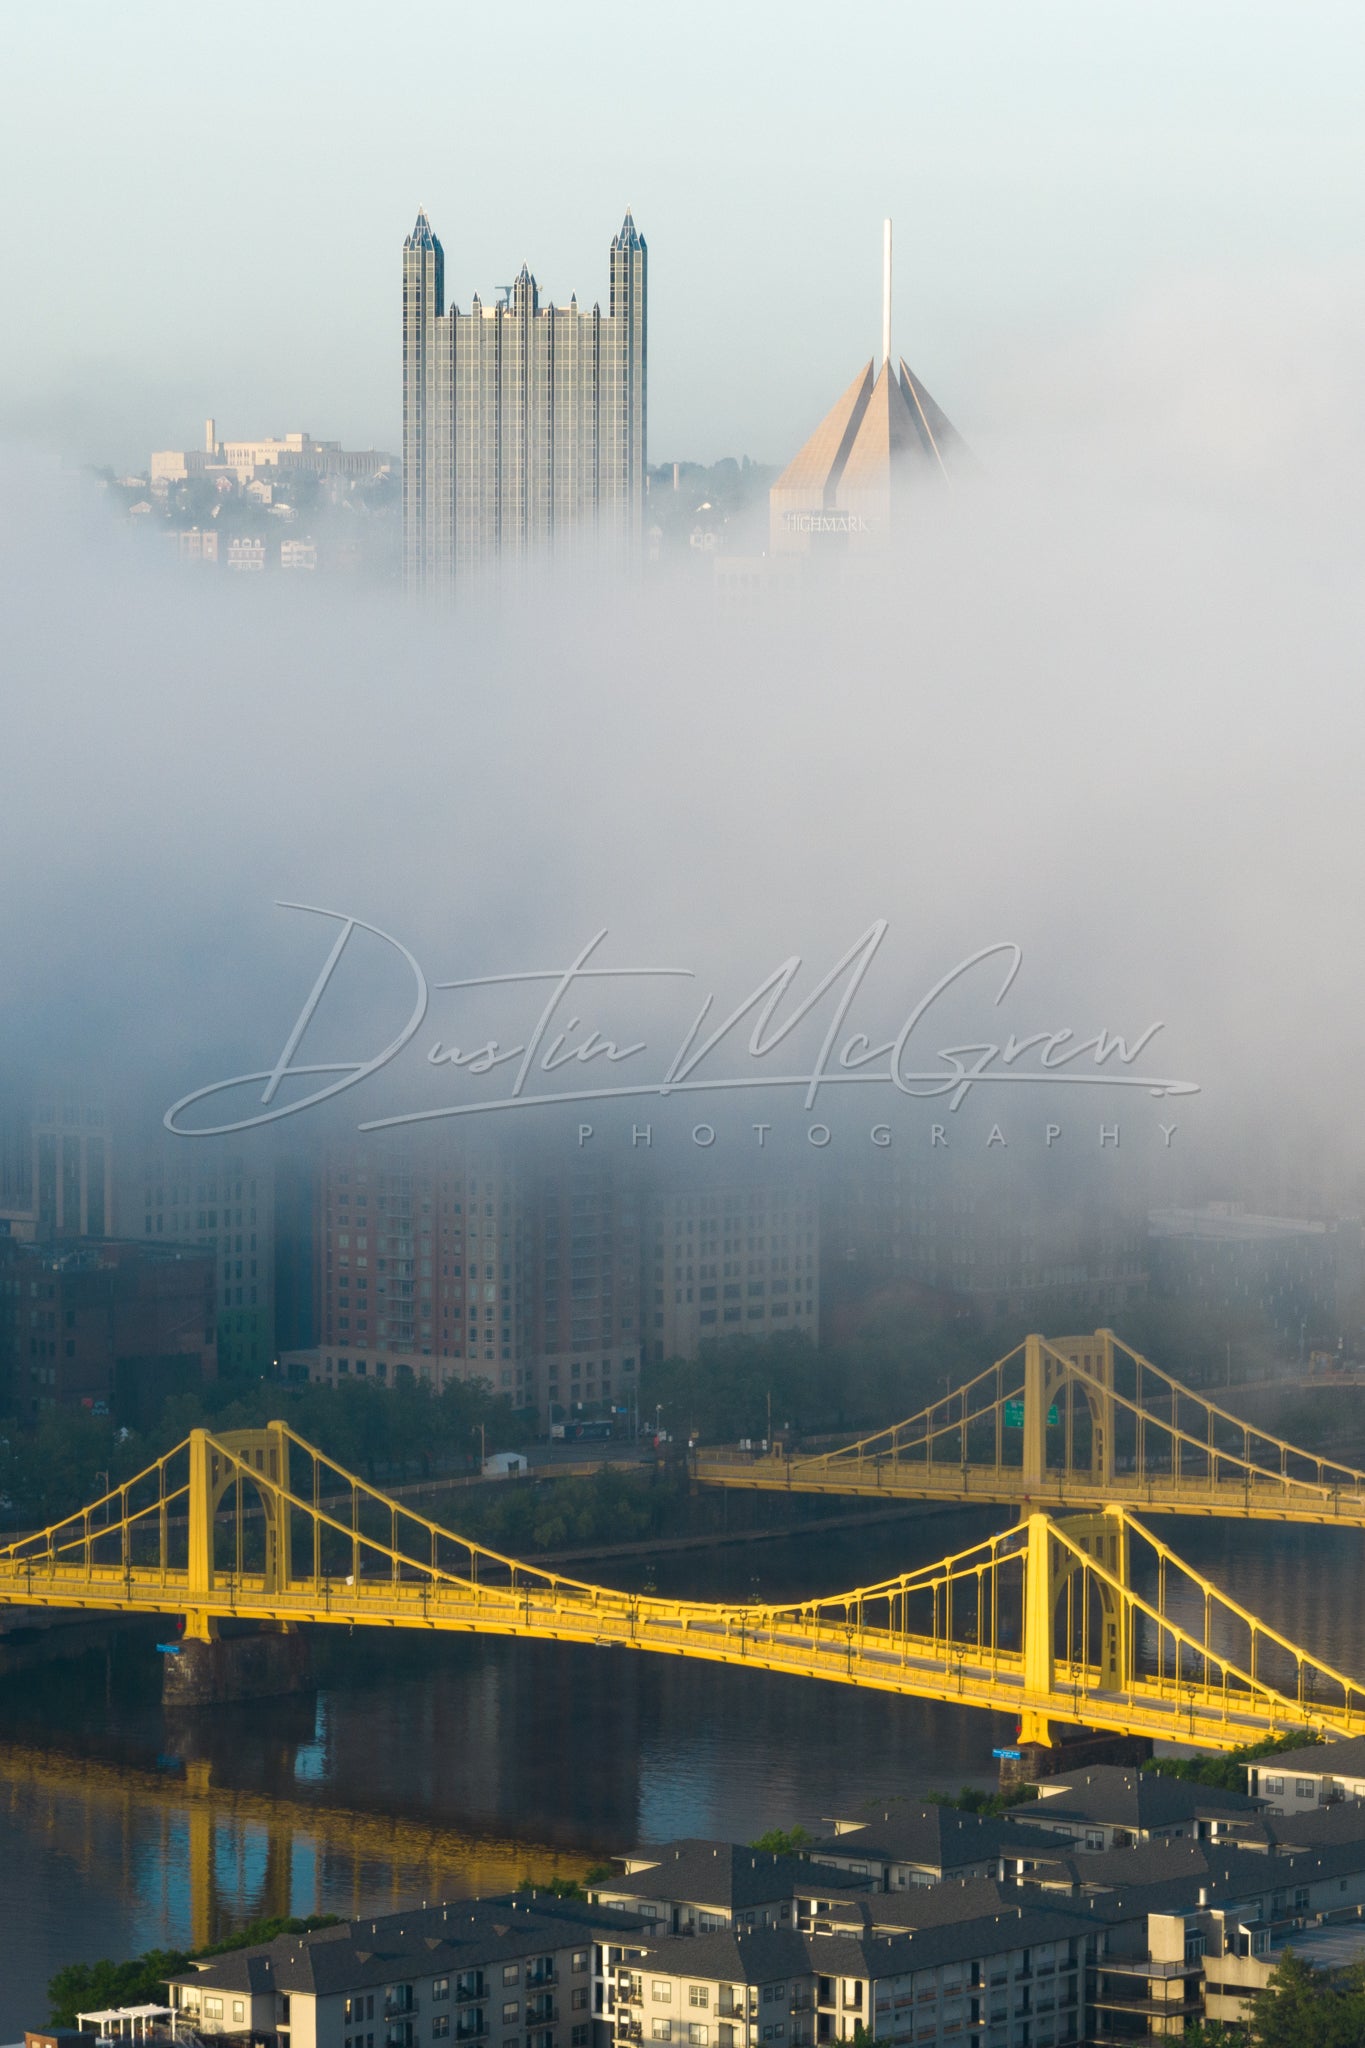 Carson Bridge with PPG Place Floating in the Fog